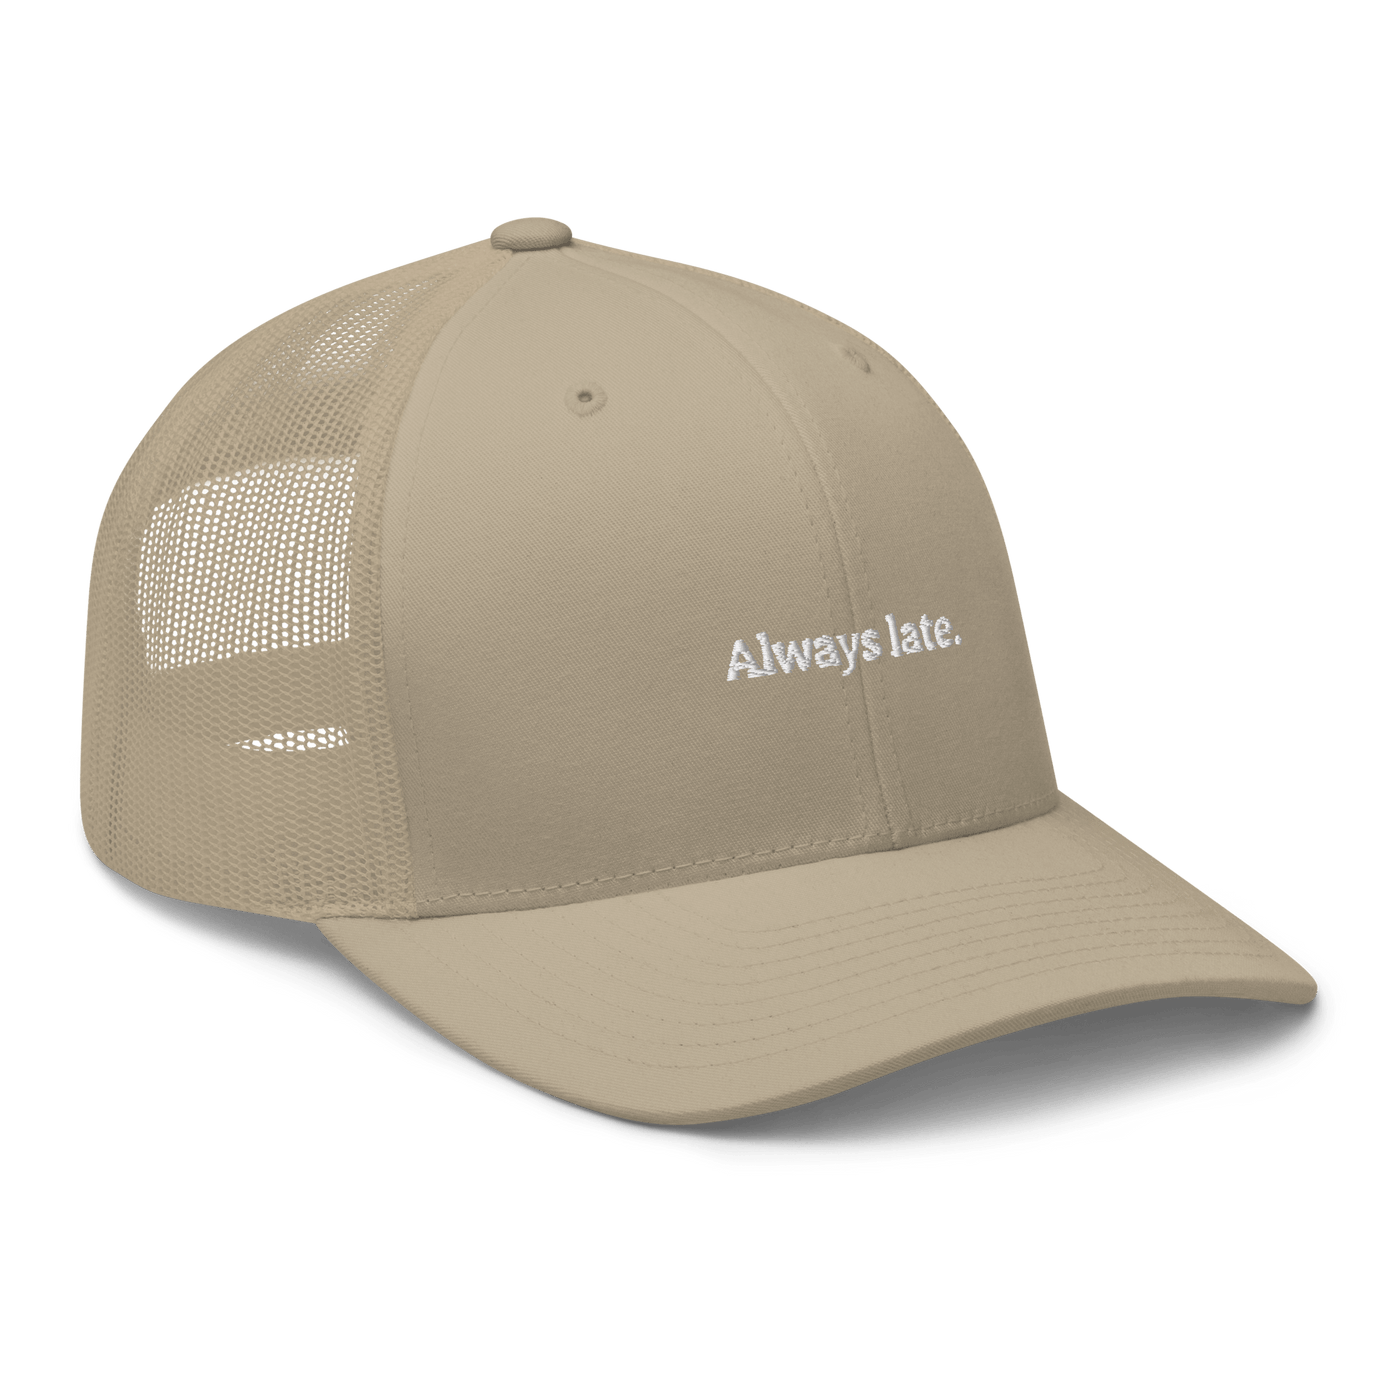 Always Late. Trucker Cap - Red - - Just Another Cap Store